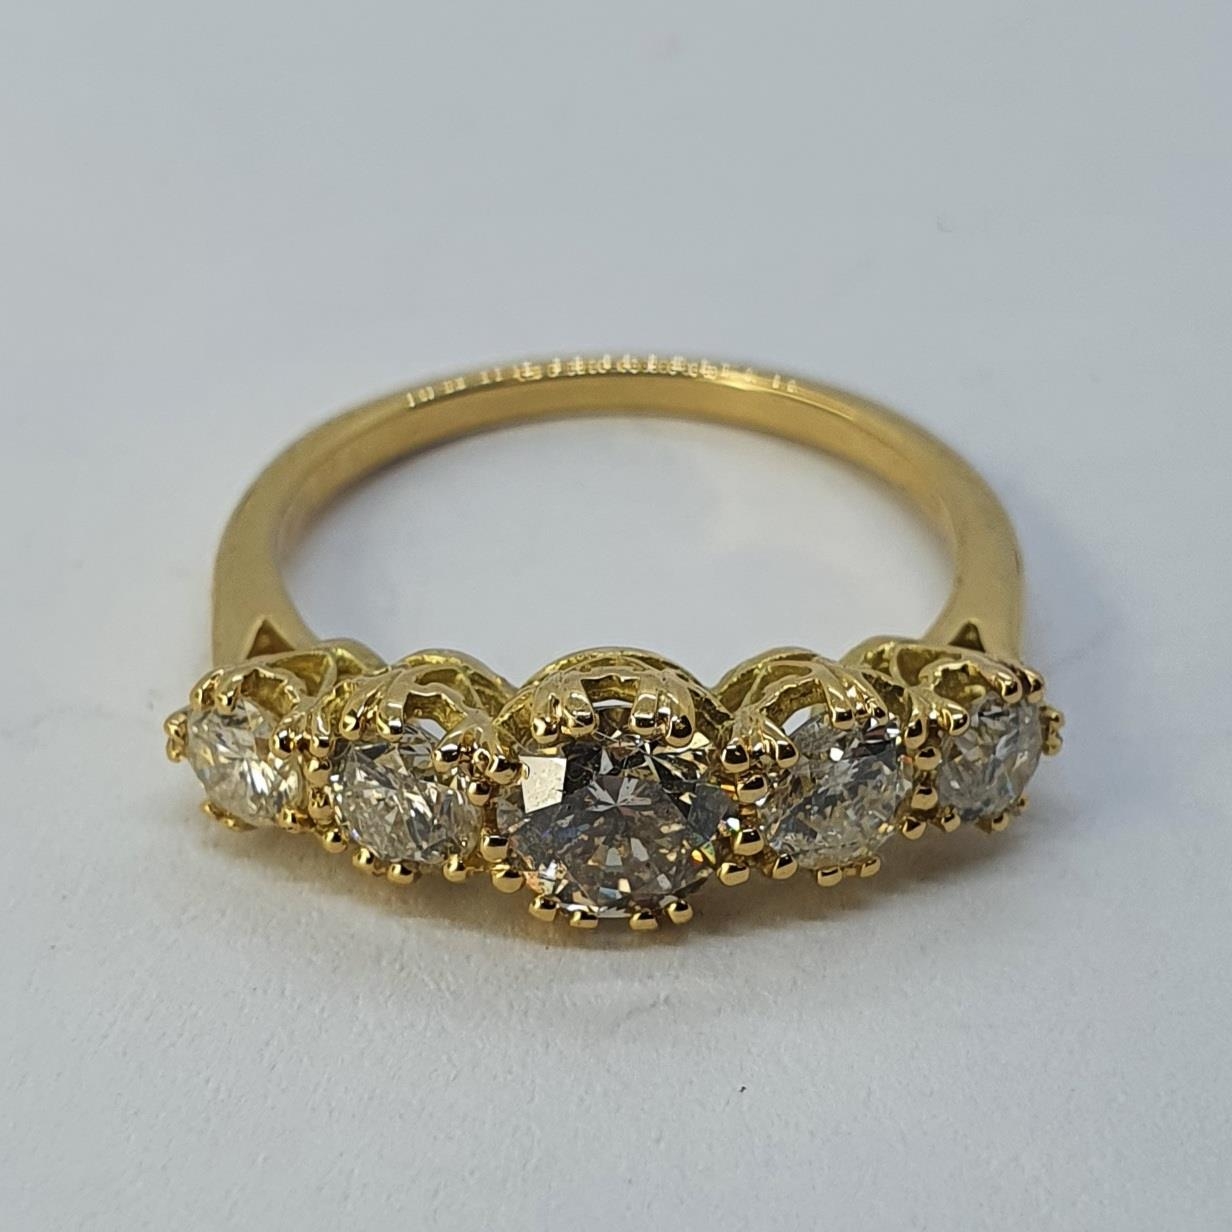 An 18ct gold and five stone diamond ring, ring size K Diamond weight 1.59ct approx. with the - Image 2 of 4